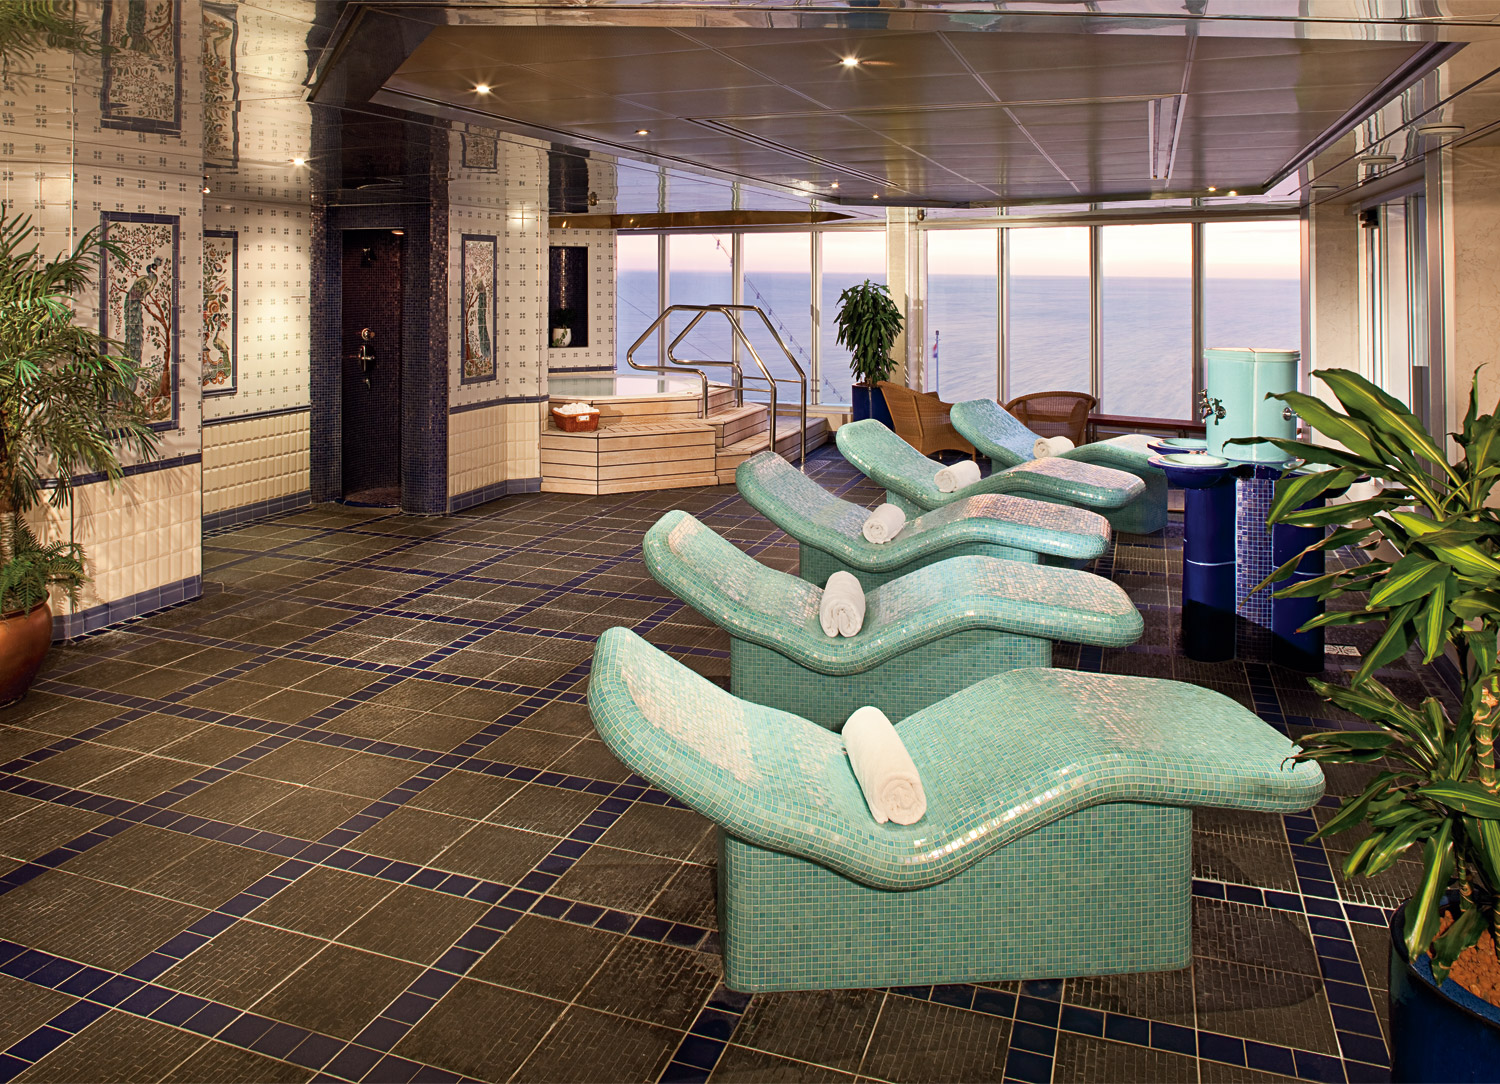  Pamper yourself in the relaxing spa onboard <em>ms Rotterdam</em>.  